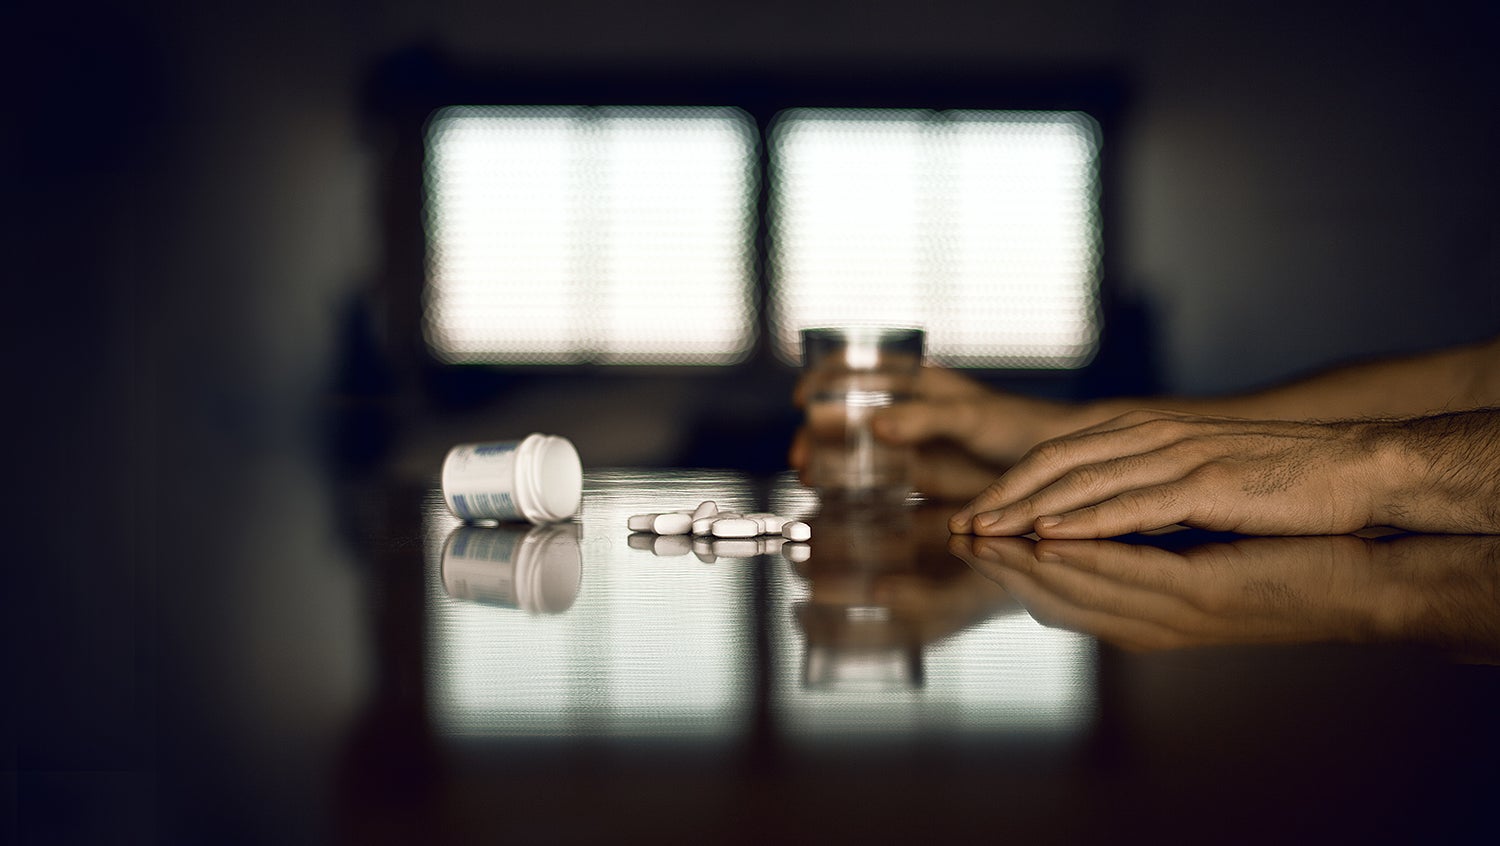 Man's hands seen on table with pill bottle of buprenorphine as part of ongoing treatment after detox.